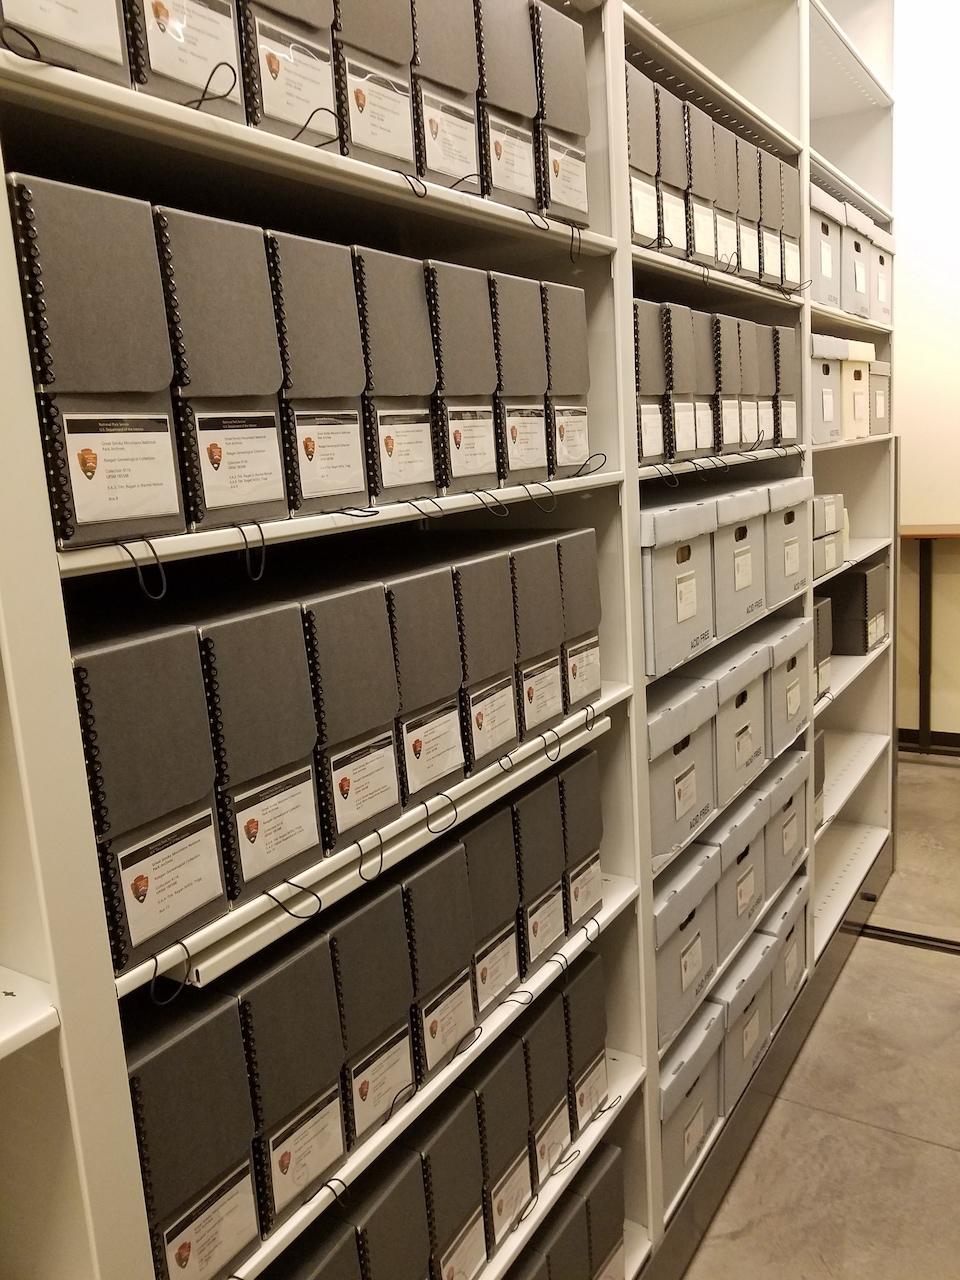 A deep genealogical collection has been donated to Great Smoky Mountains National Park/NPS